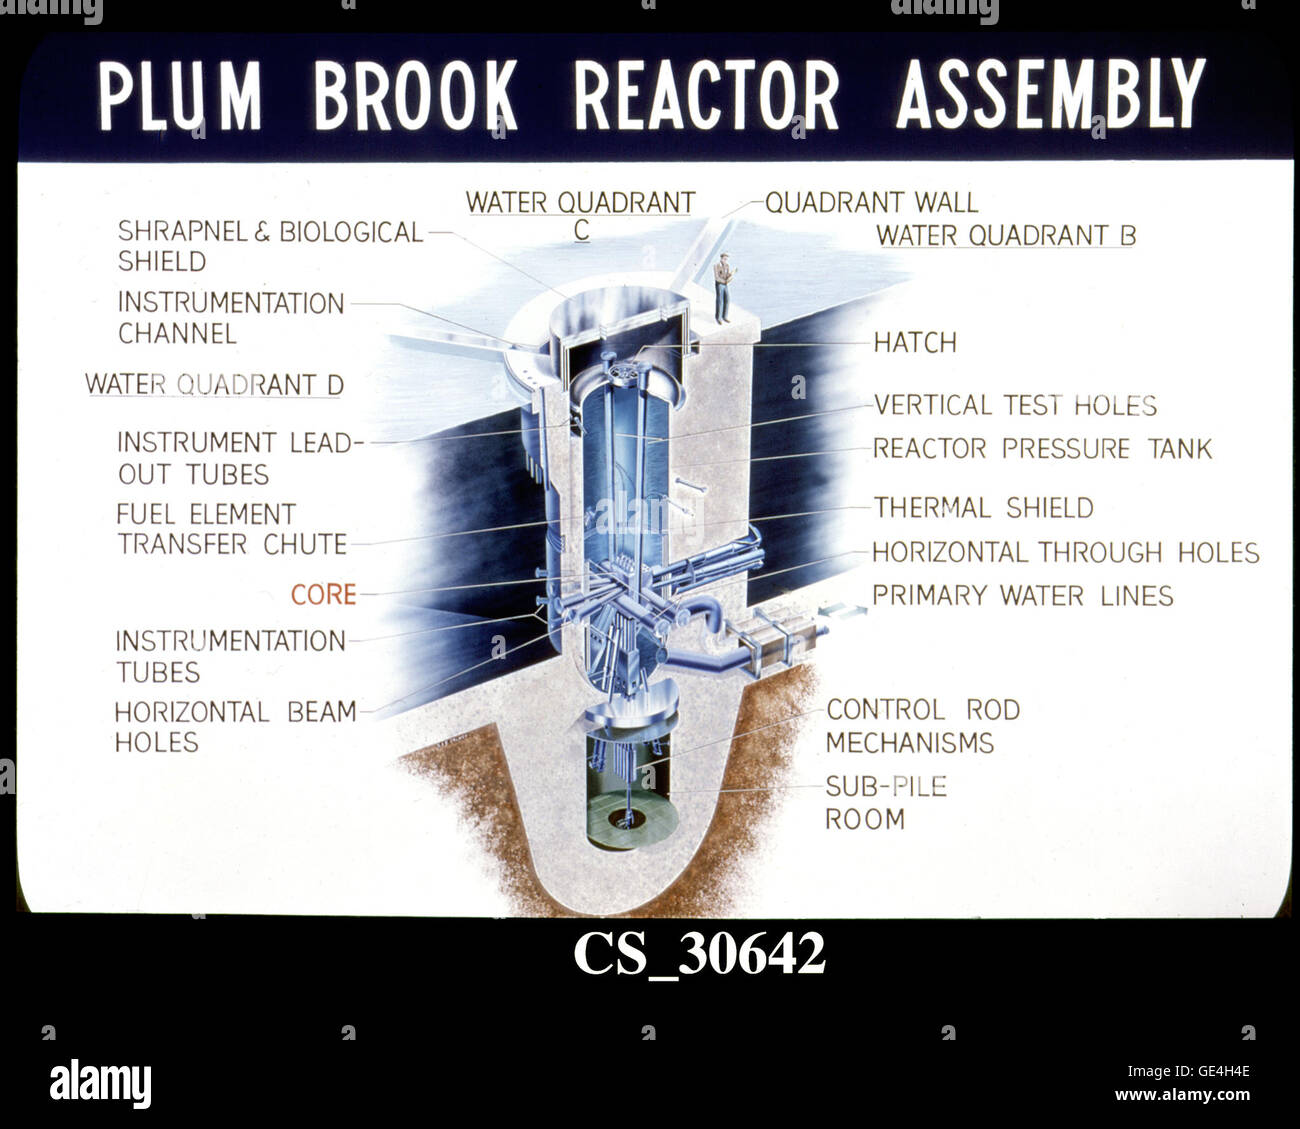 A cutaway drawing of the Plum Brook reactor assembly within the pressure tank. The drawing reveals an array of test holes, the core, sub-pile room, control rods,water lines, etc. The tank was surrounded by four shielding quadrants, three containing water. Quadrant B was constructed with extra concrete shielding so that water was not necessary. This construction provided unique capabilities for handling experimental packages. Despite the significance of this feature, the artist erroneously depicts Quadrant B as being filled with water.  Image # : CS-30642 Stock Photo